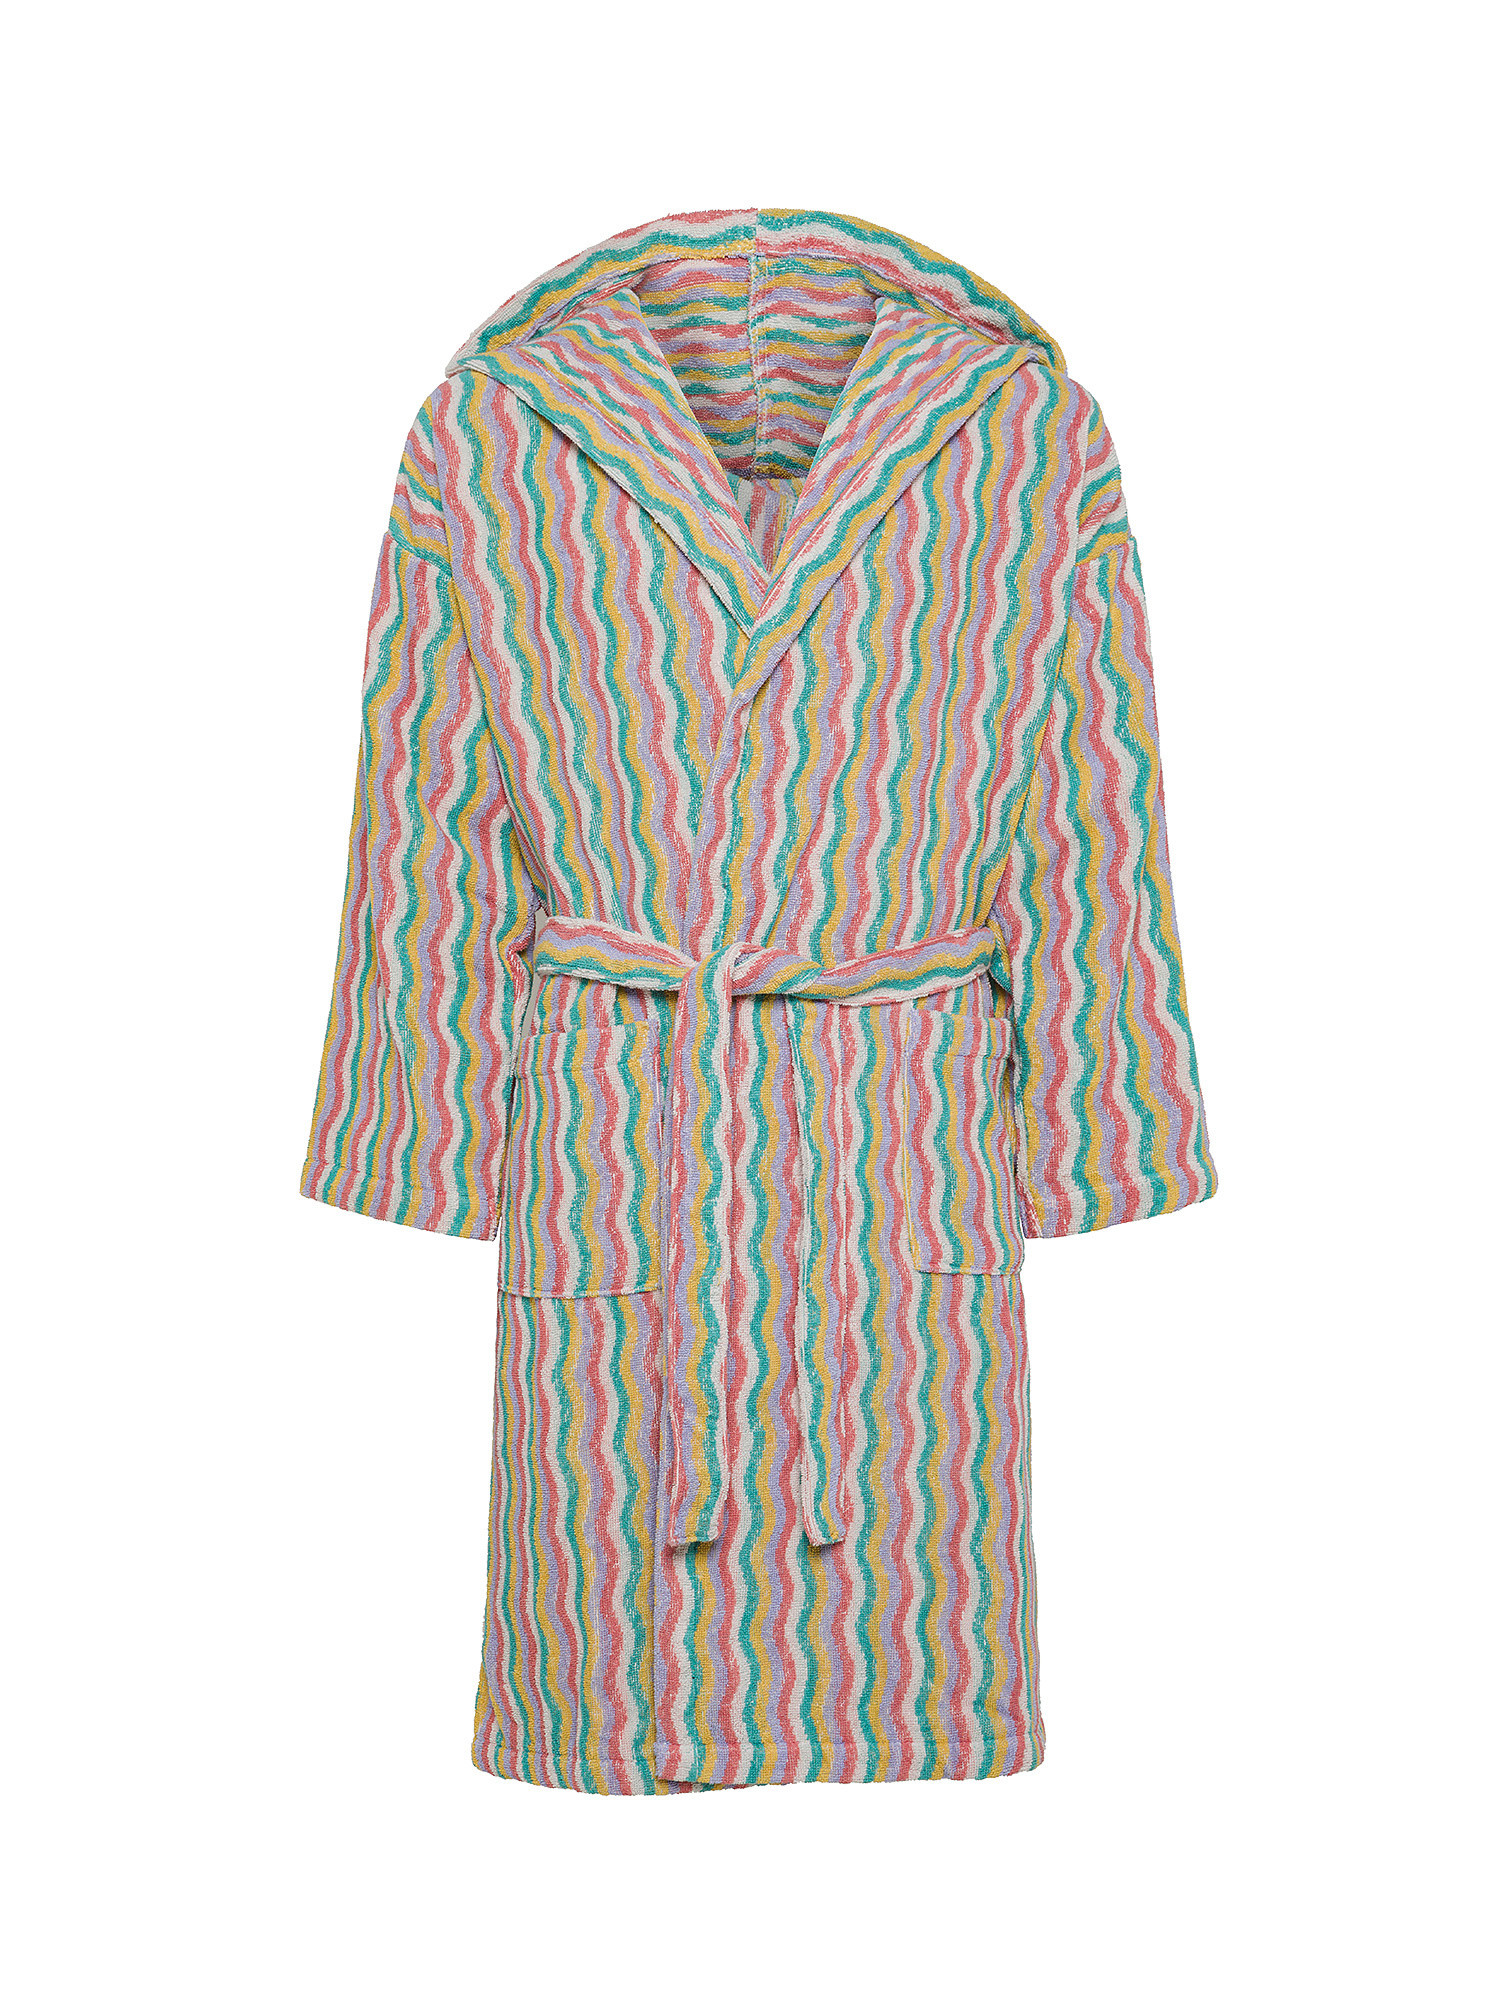 Terry cotton bathrobe with zig zag motif, Multicolor, large image number 0